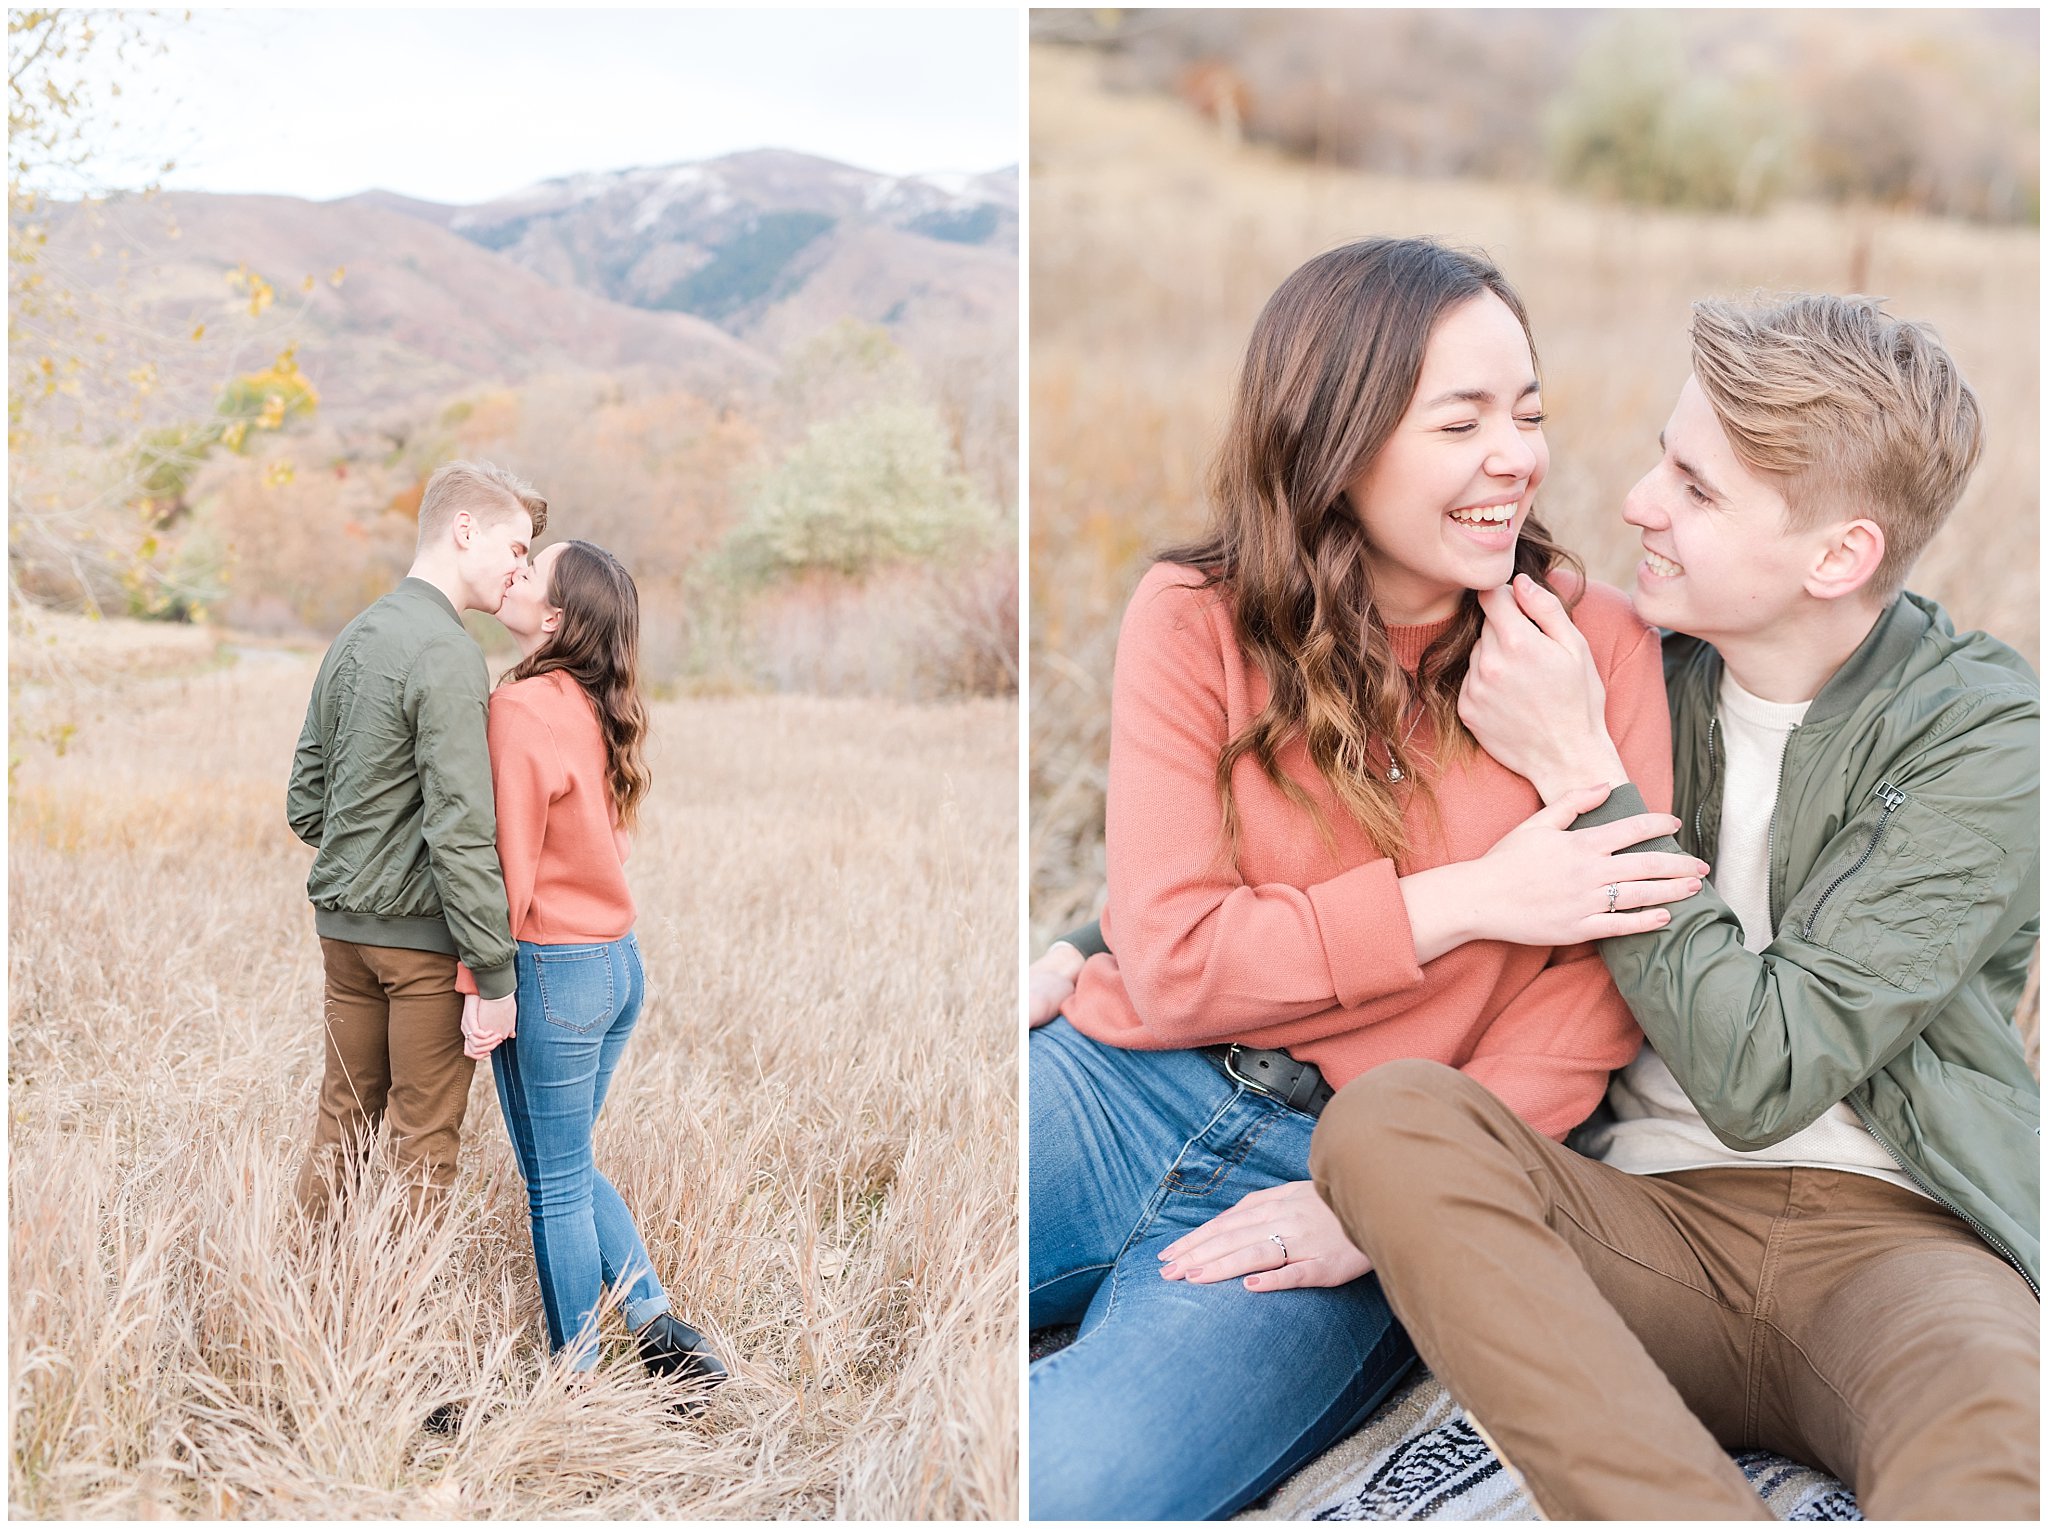 Couple dressed in fall colored sweater, jacket, jeans and boots with snowy mountain views | Kays Creek Parkway Fall Engagement Session | Utah Fall Engagement | Jessie and Dallin Photography